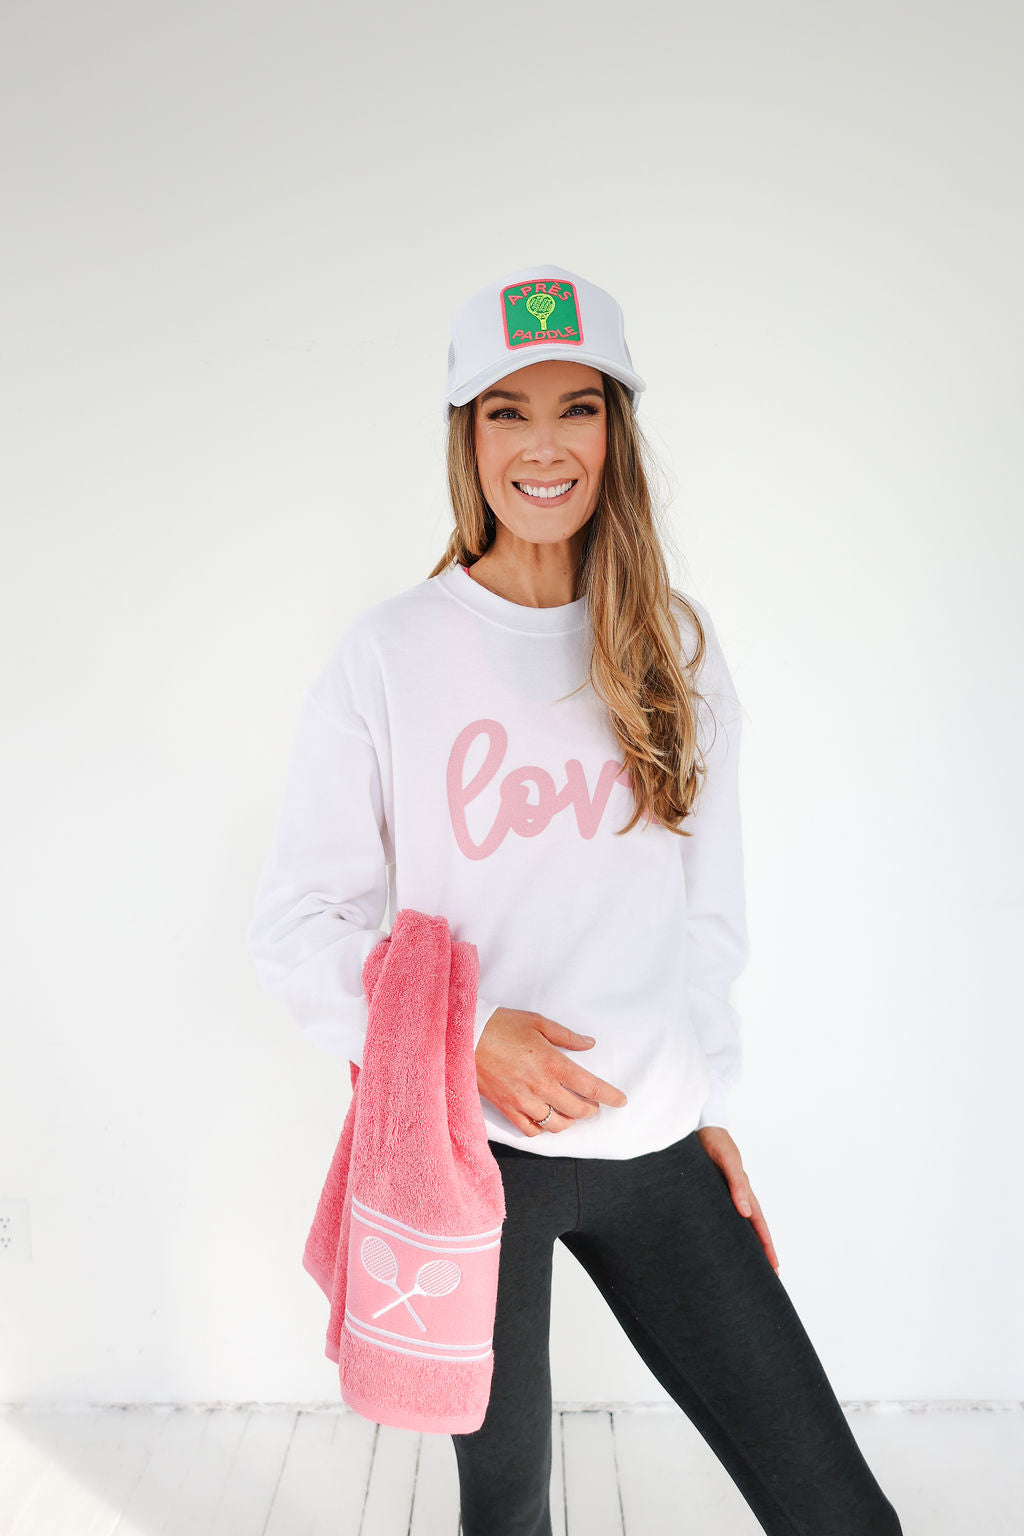 A terry sports towel in either pink or yellow with tennis racket icons embroidered on for a chic and practical item to keep in your tennis bag.